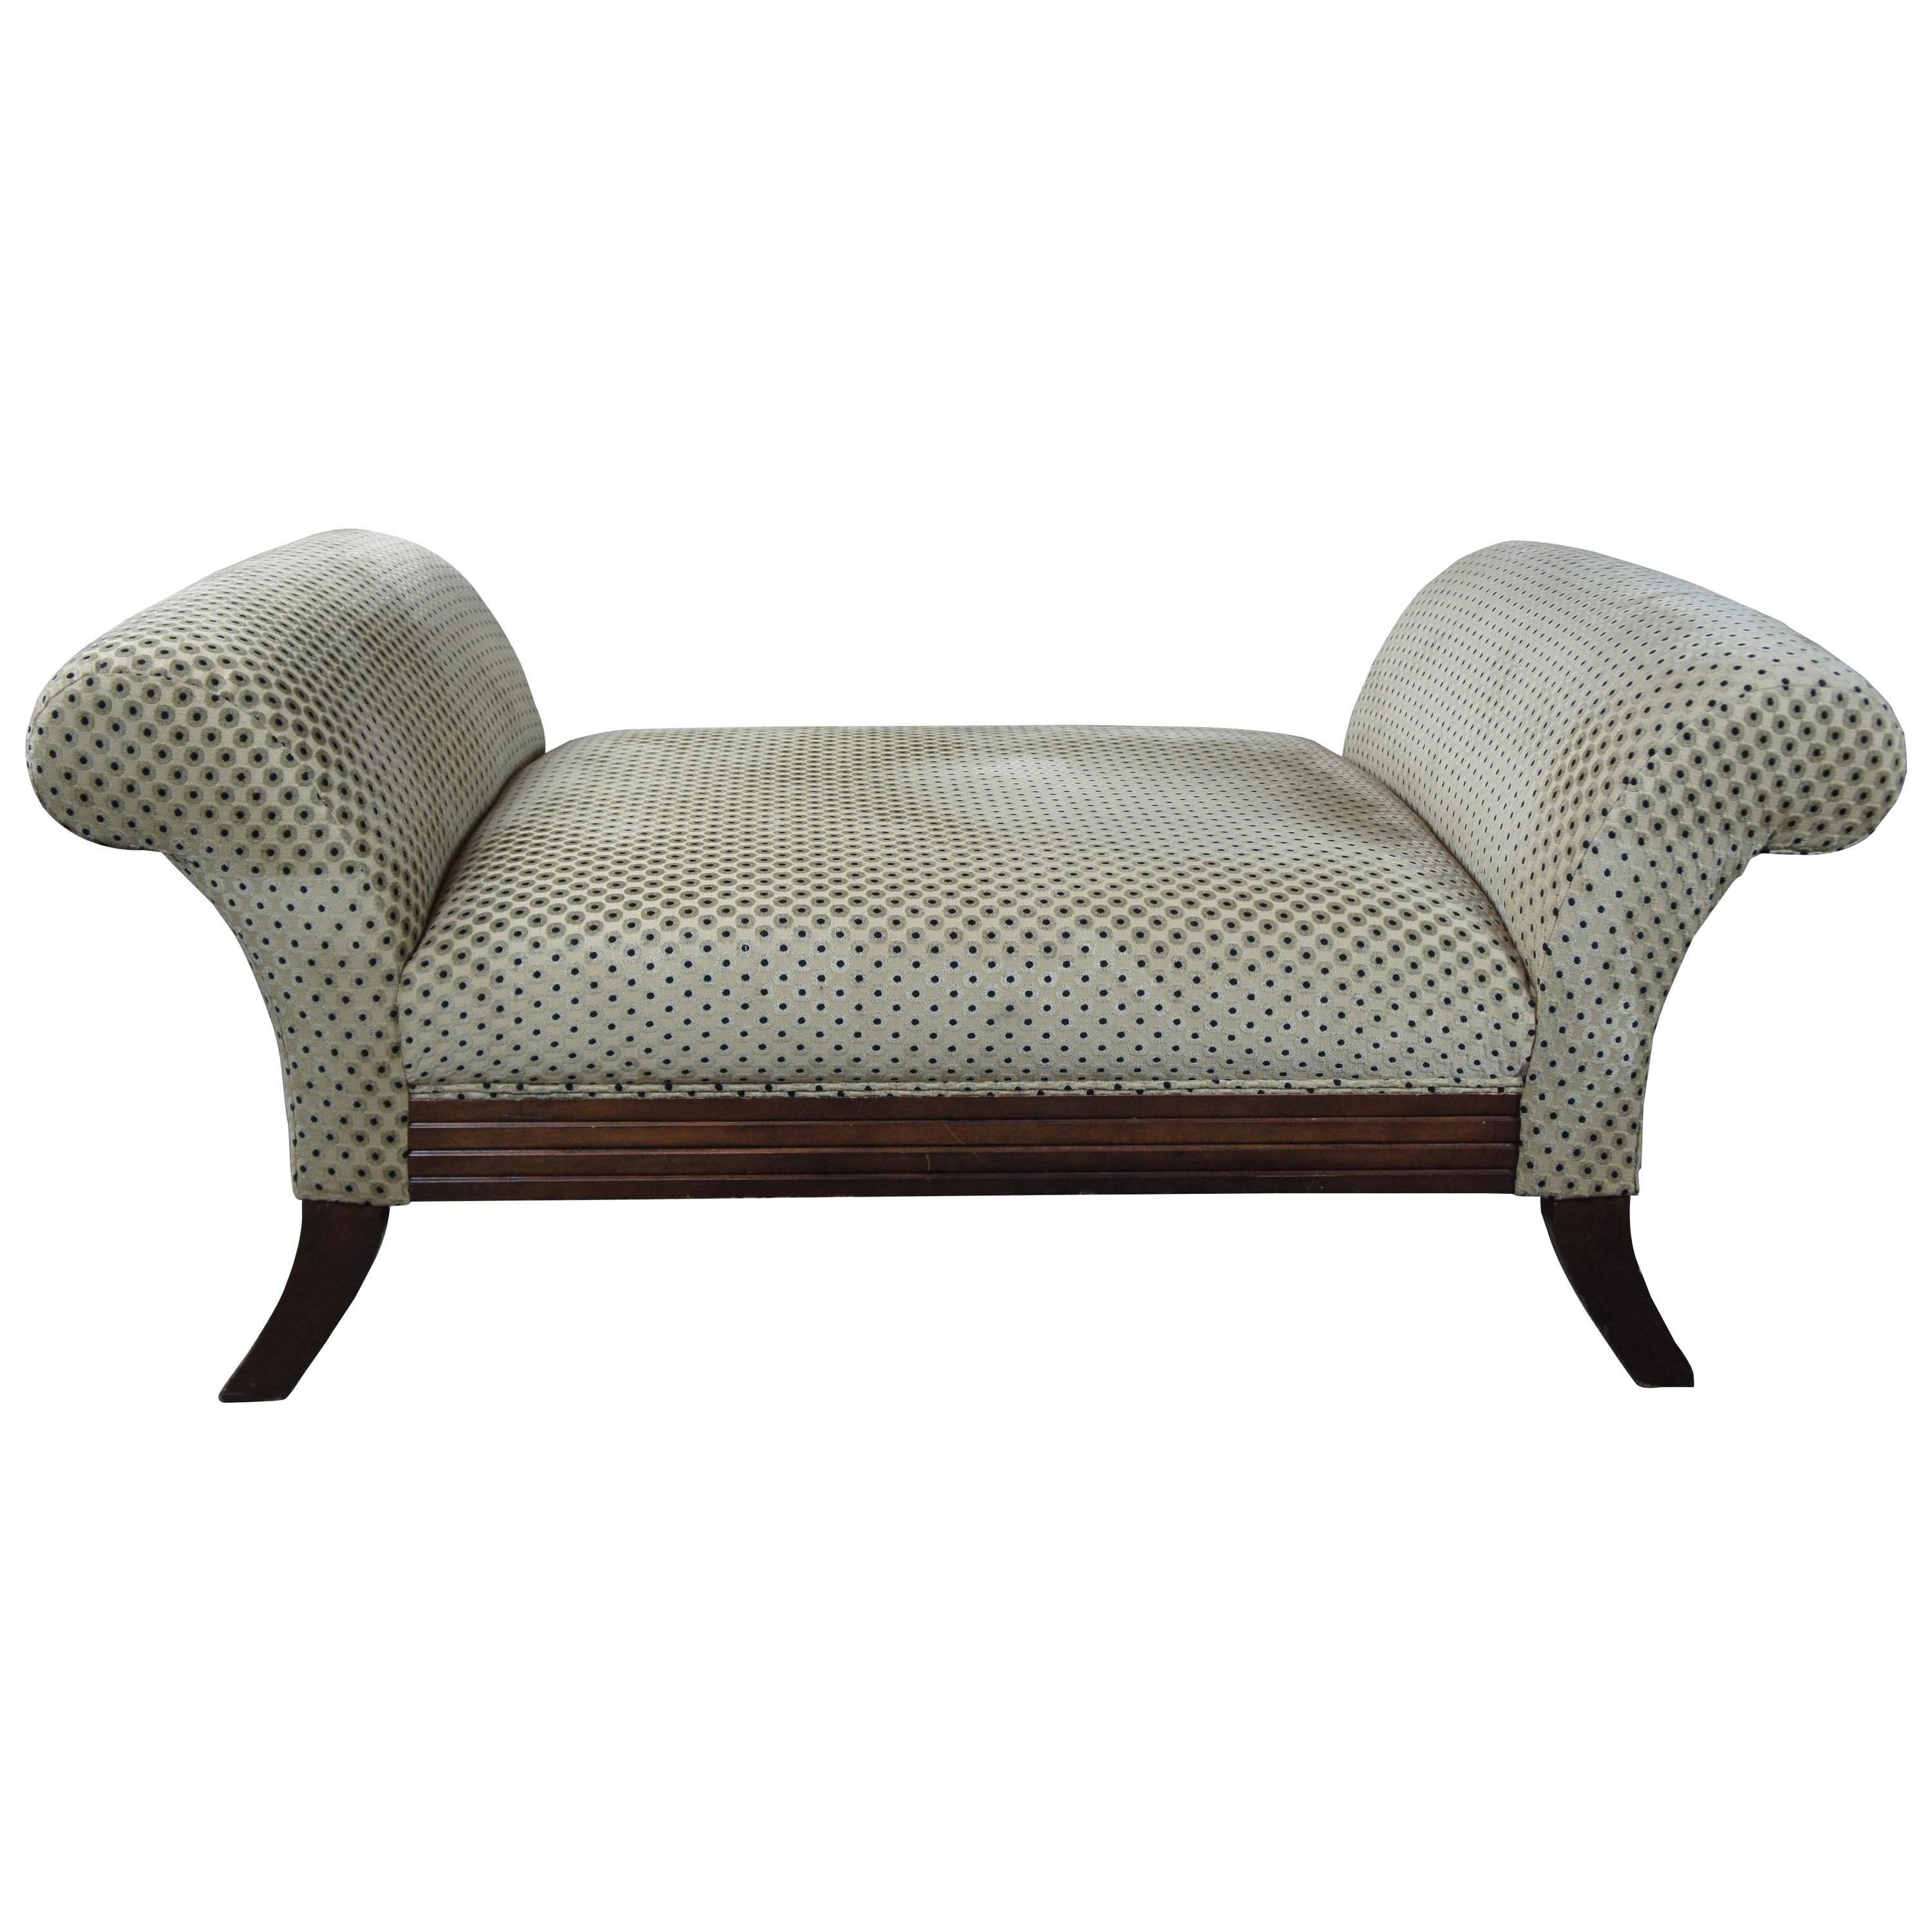 Traditional Contemporary Polka Dot Upholstered Lounge Day Bed Settee